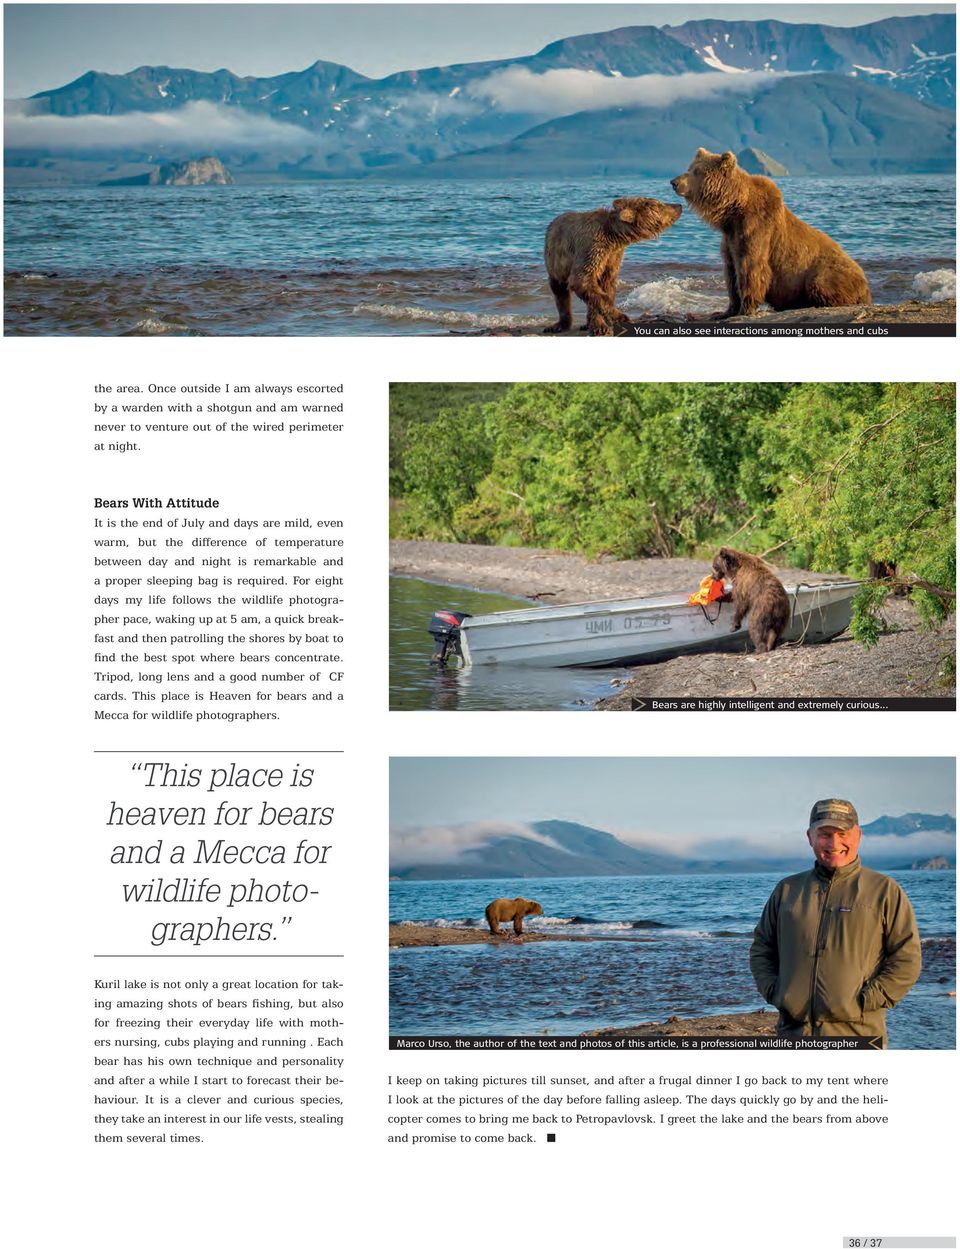 For eight days my life follows the wildlife photographer pace, waking up at 5 am, a quick breakfast and then patrolling the shores by boat to find the best spot where bears concentrate.